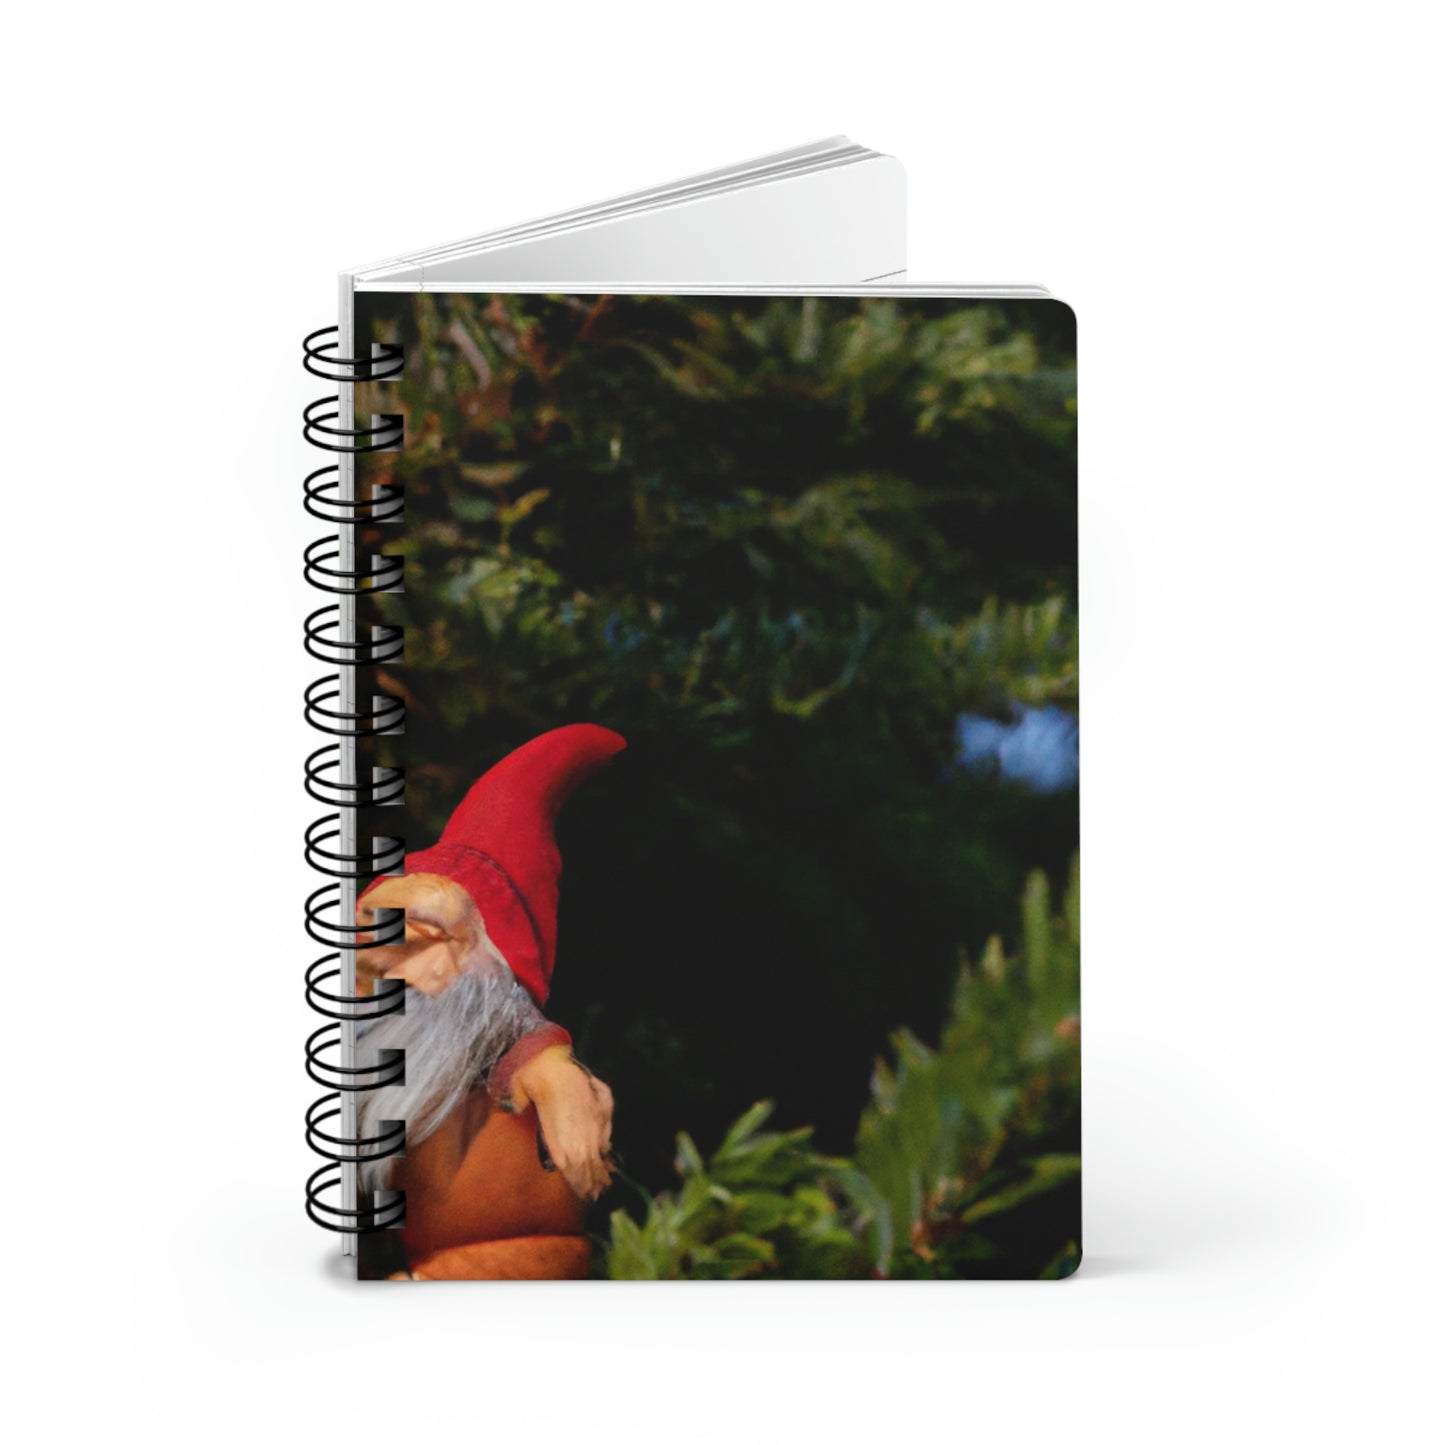 The Gnome's High-Rise Adventure - The Alien Spiral Bound Journal